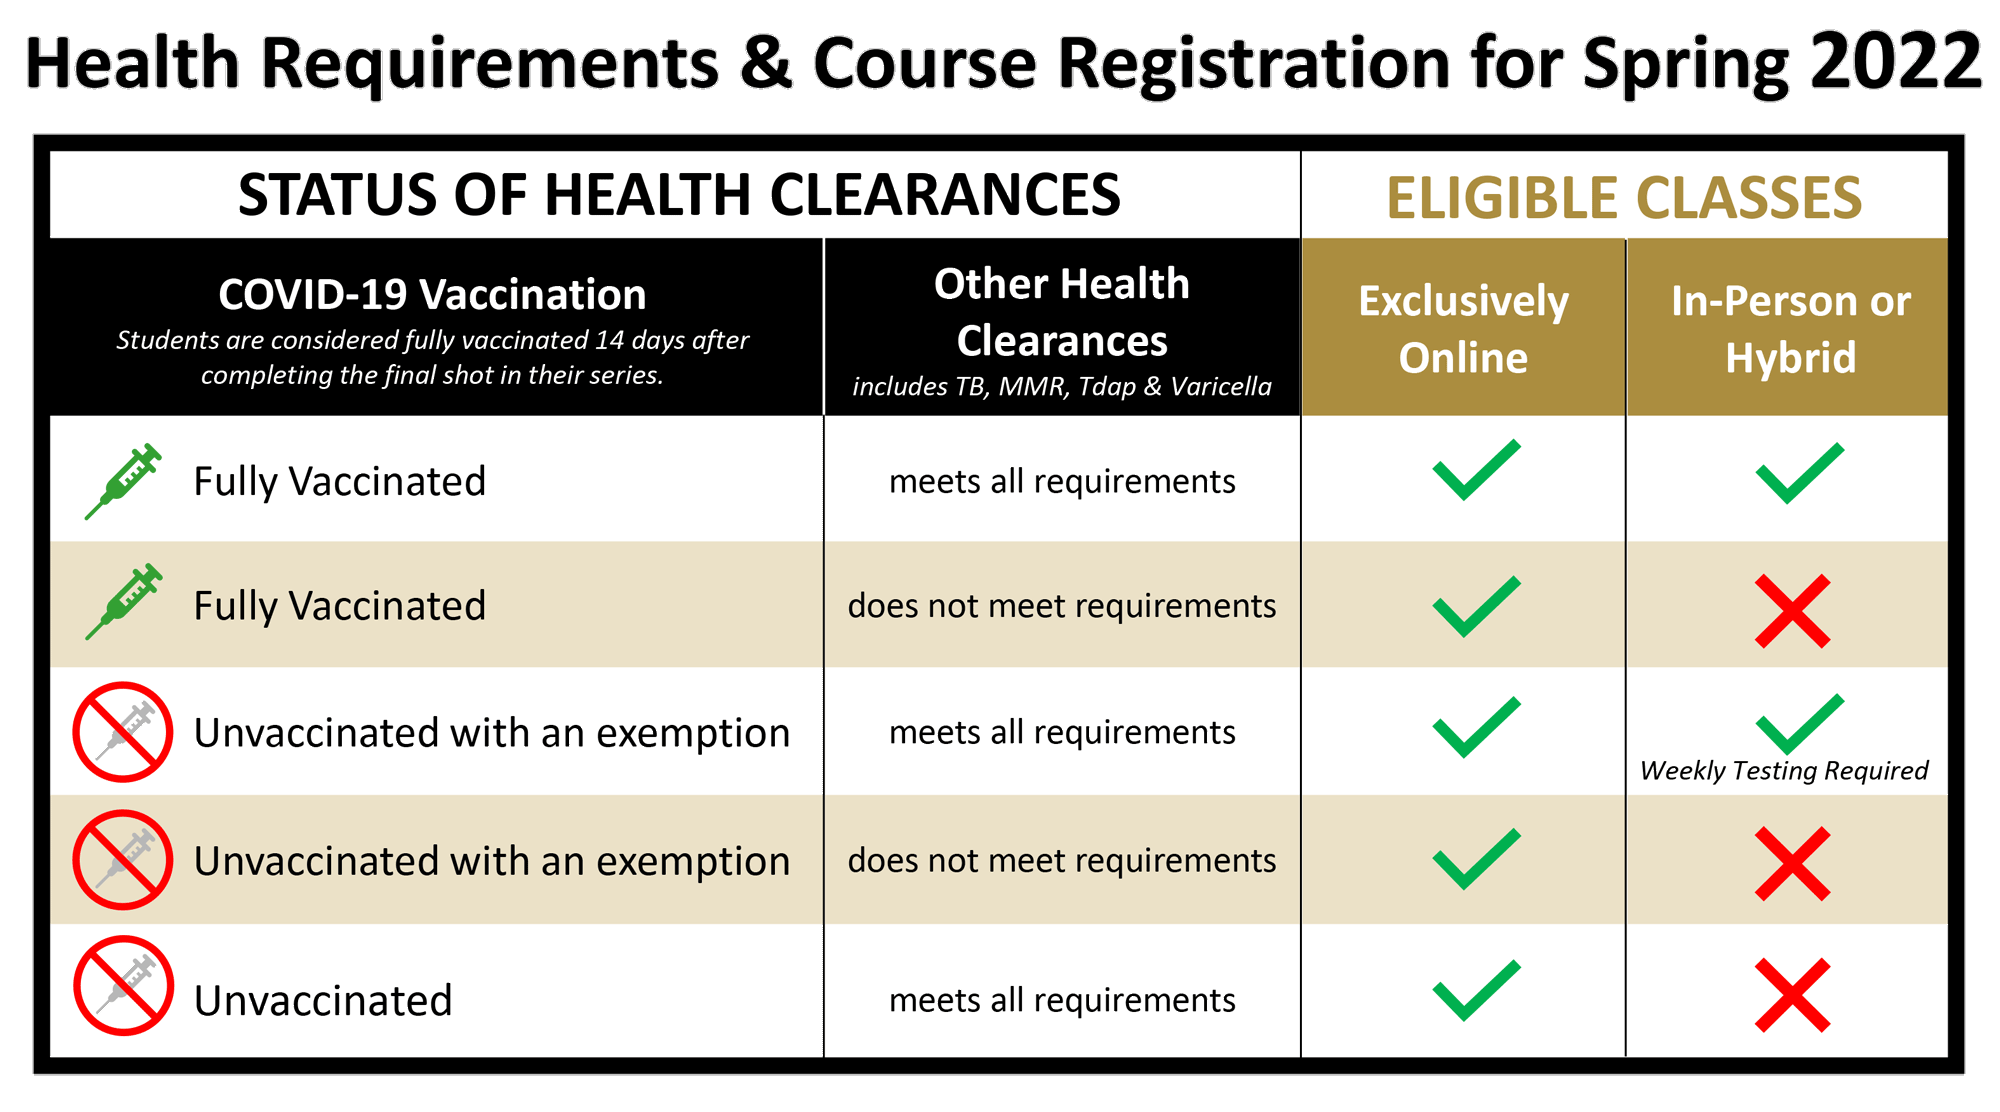 Health Requirements and Course Registration for Spring 2022 chart